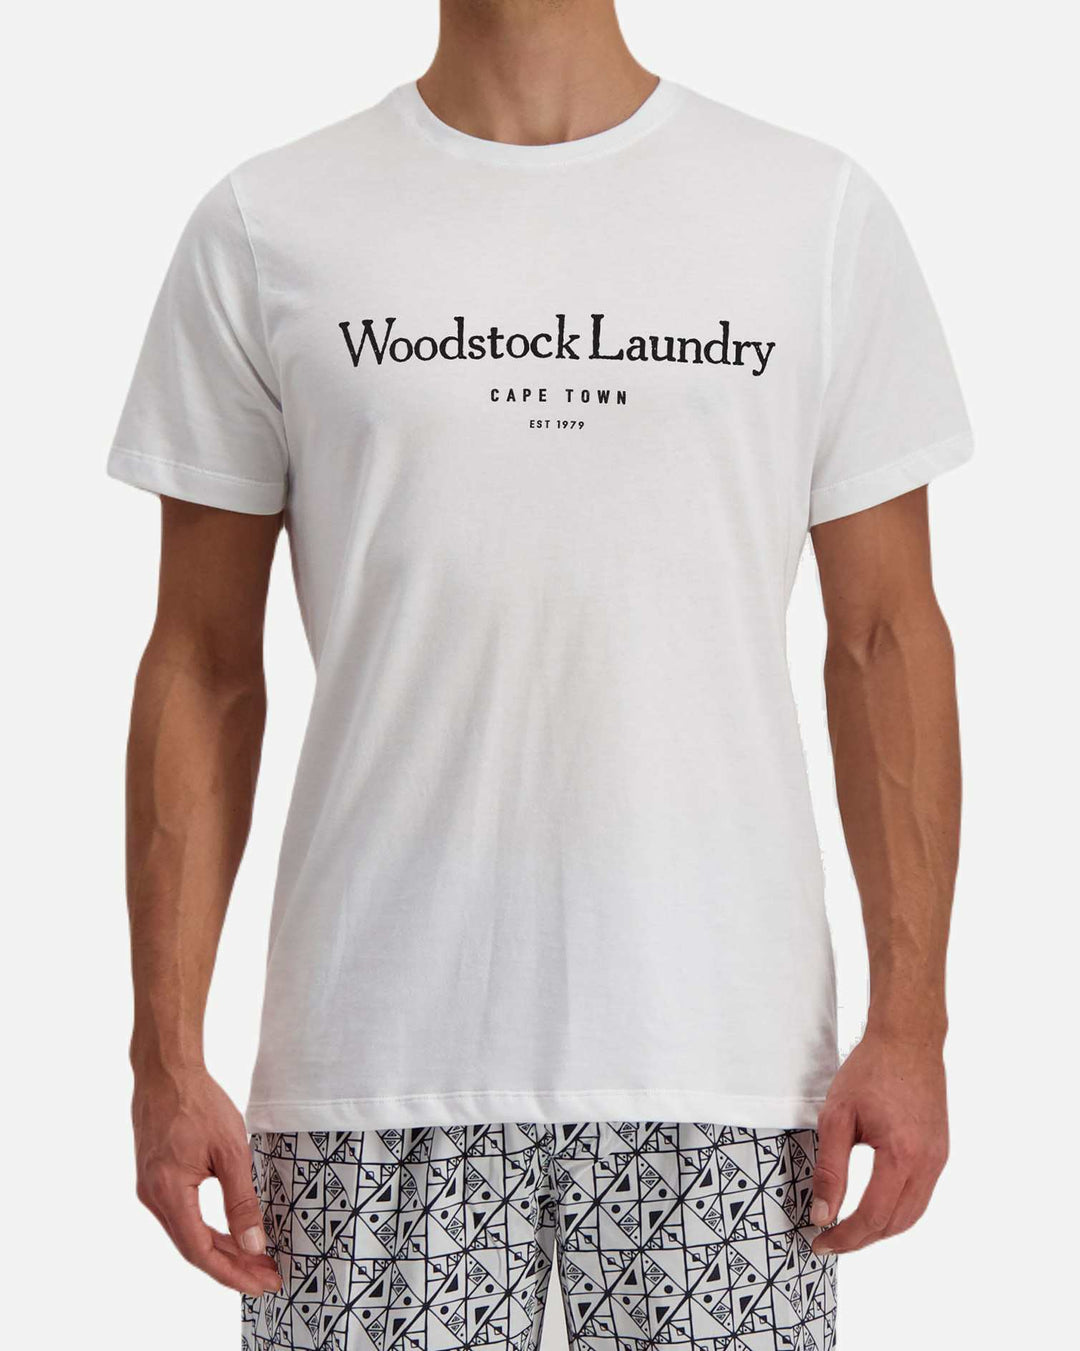 Mens white t-shirts with typo